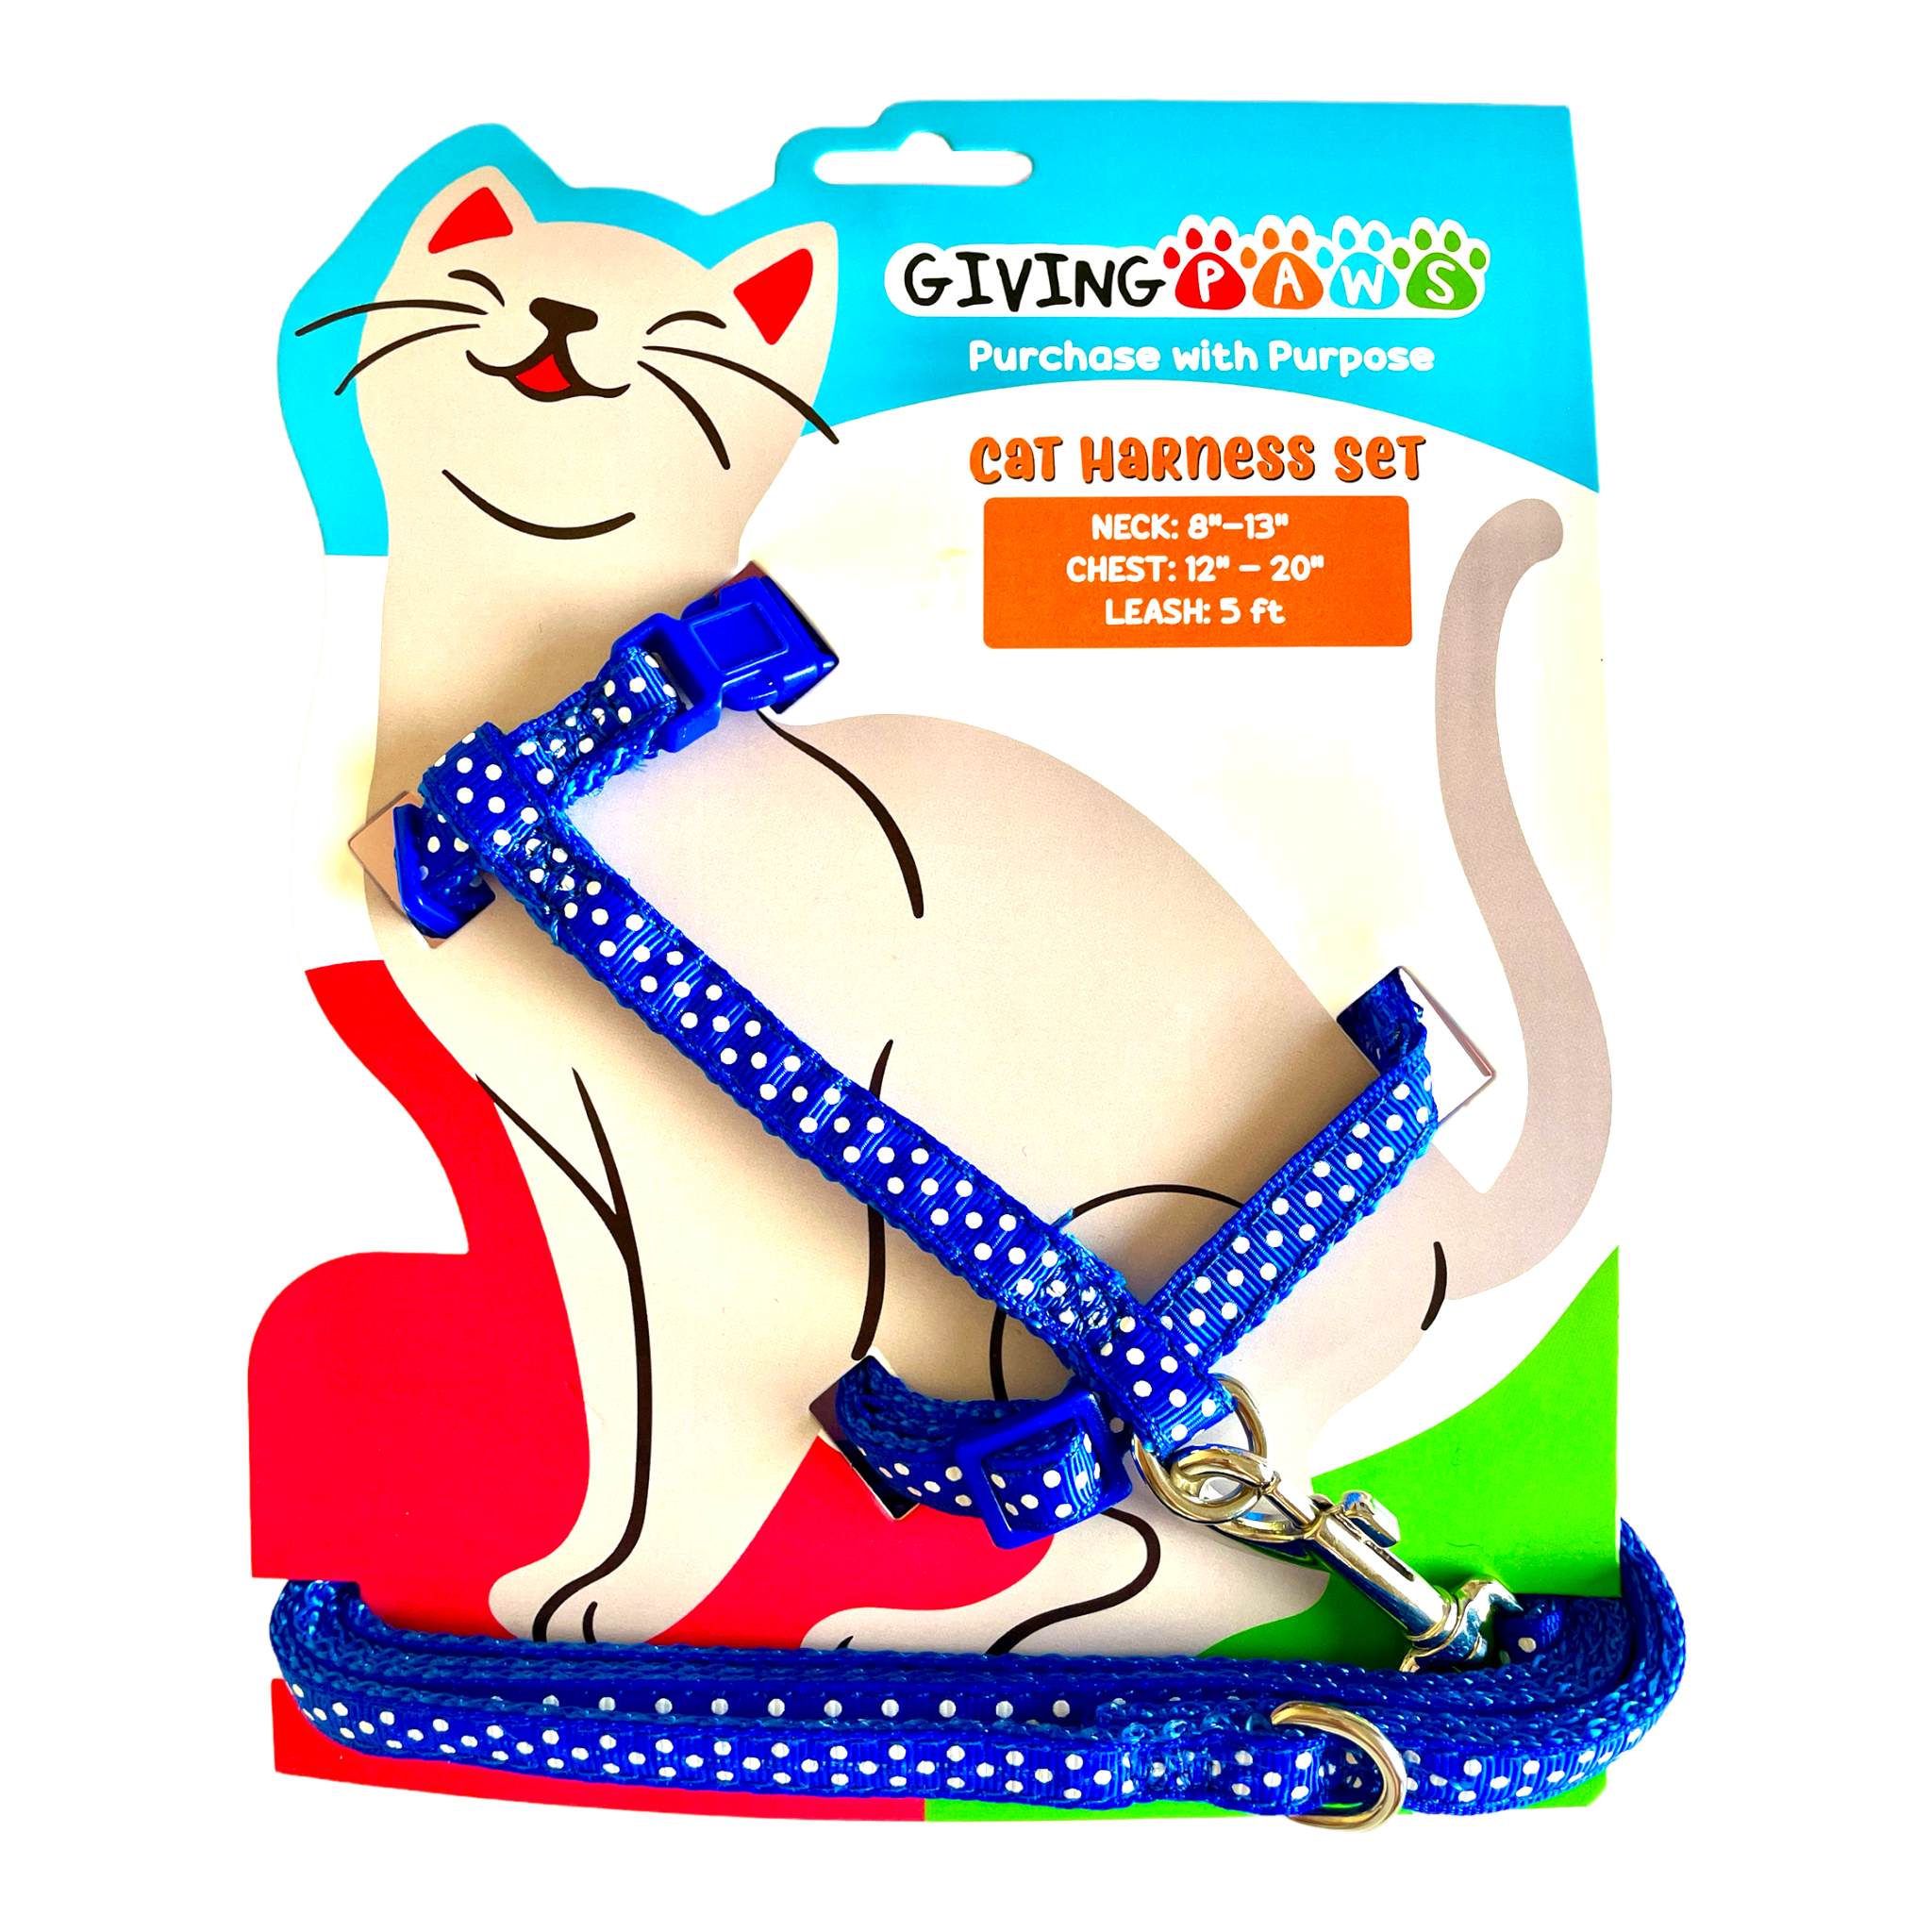 Giving Paws - Polka Dot Cat Harness and Leash Set - Giving Back to Pets in Need - Colorful Fashionable Cat Harness Set for Walking - Adjustable Cat